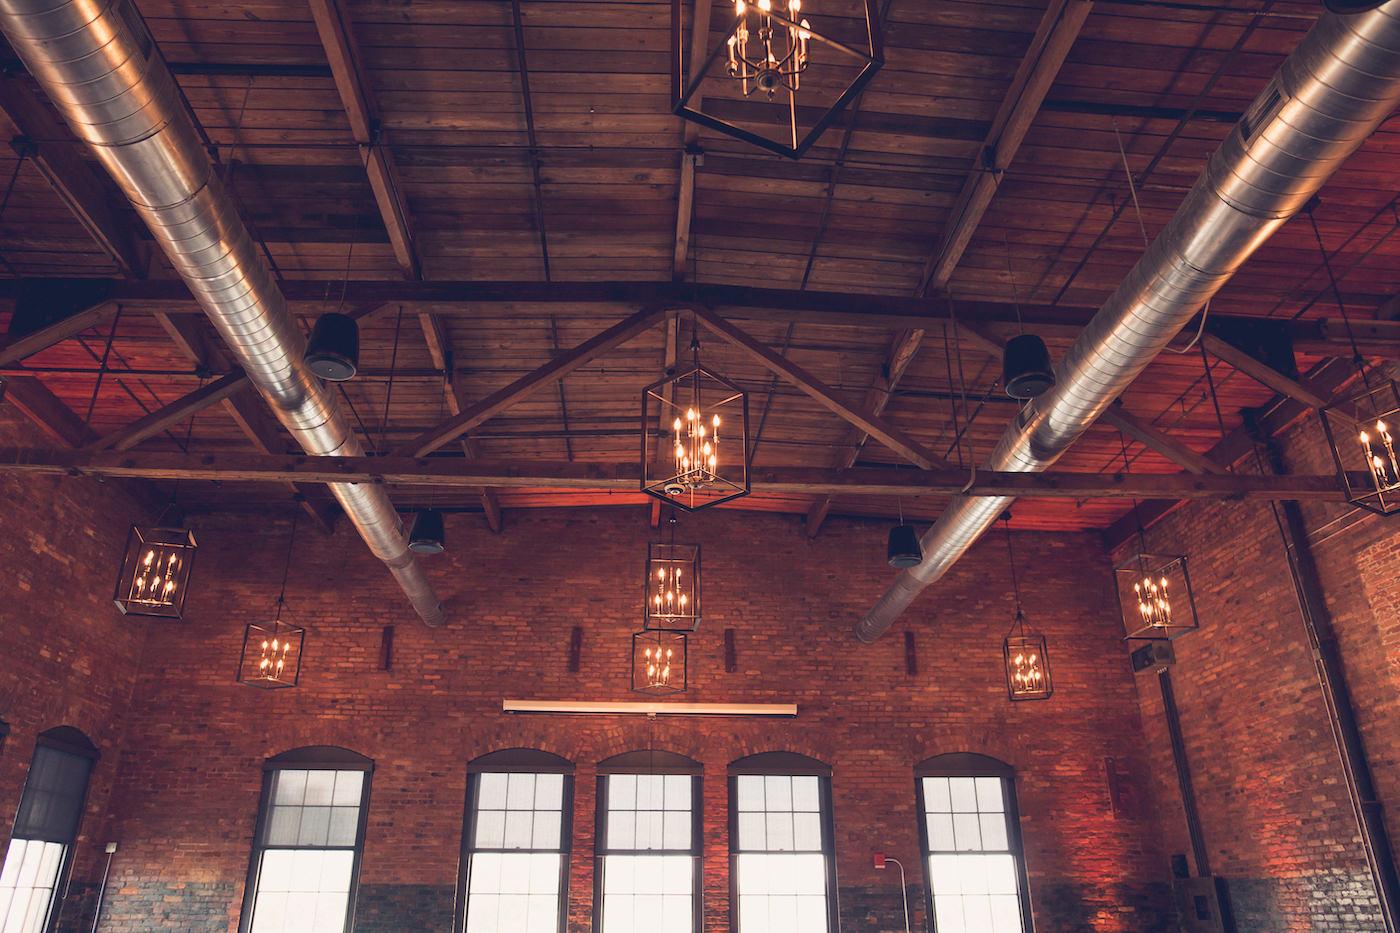 Tampa Wedding Historic Venue Armature Works Unique Architecture with Brick Walls and Exposed Beam ceilings with Edison Bulb Chandeliers